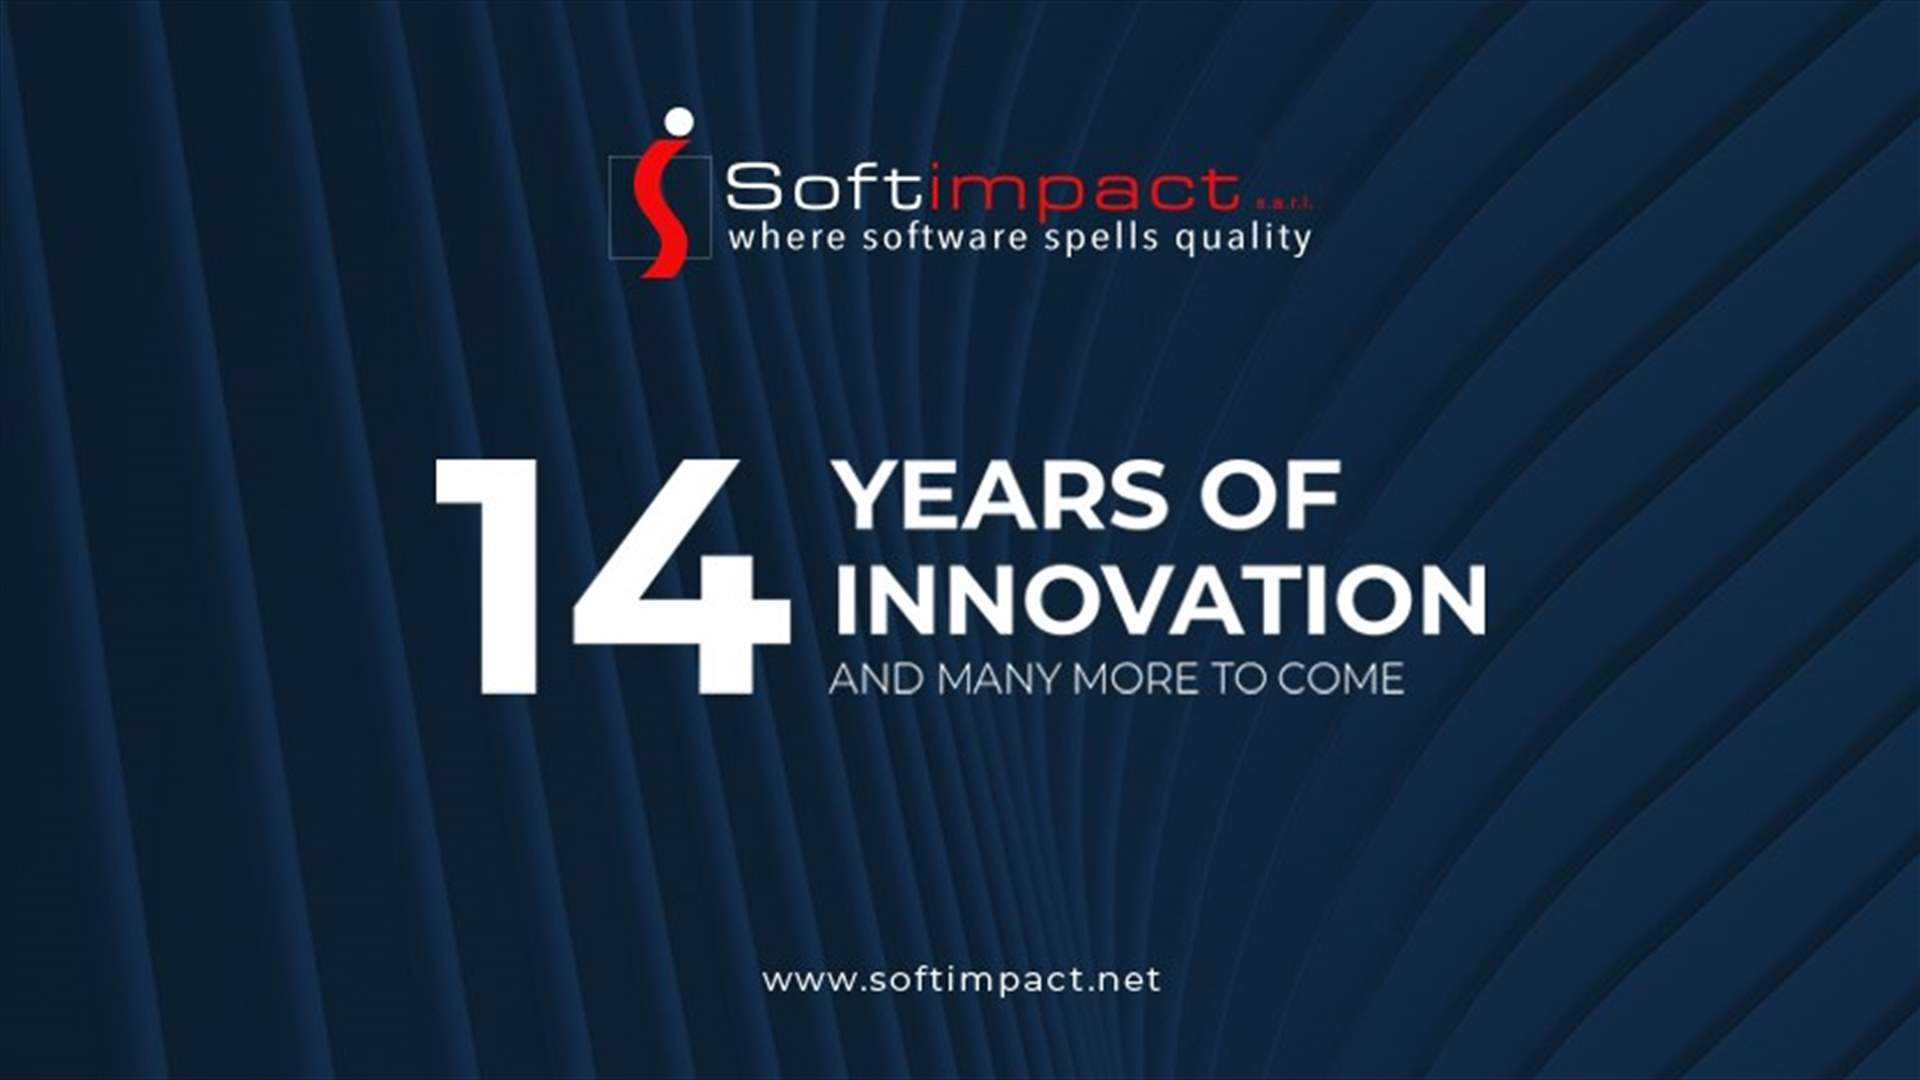 Softimpact, a leader in MENA digital solutions market, turns 14